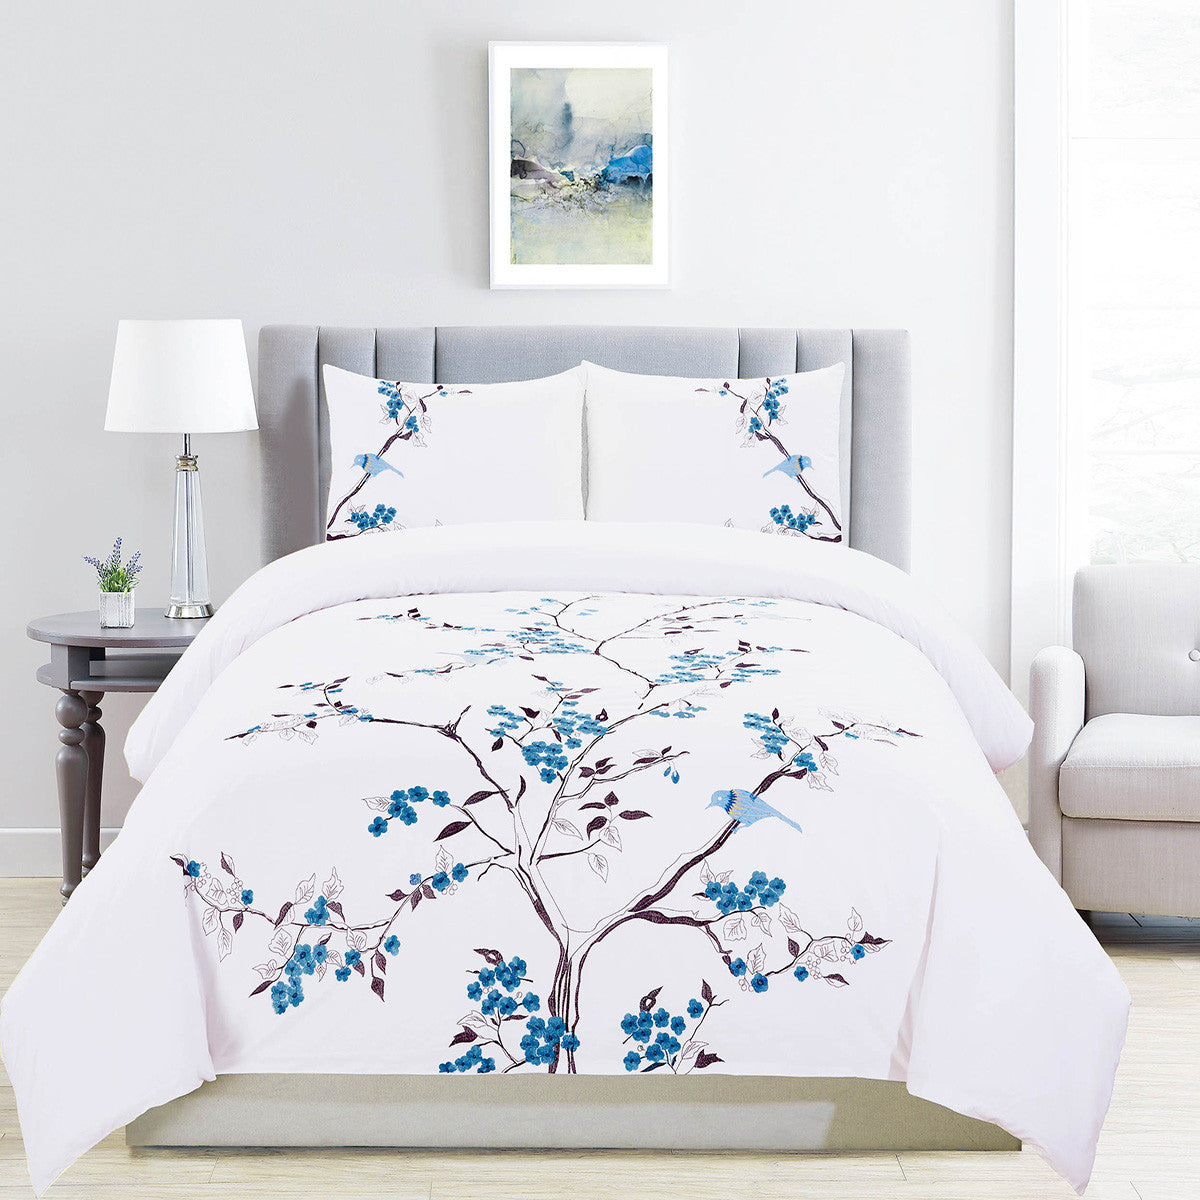 Blue and White King 100% Cotton 200 Thread Count Washable Duvet Cover Set